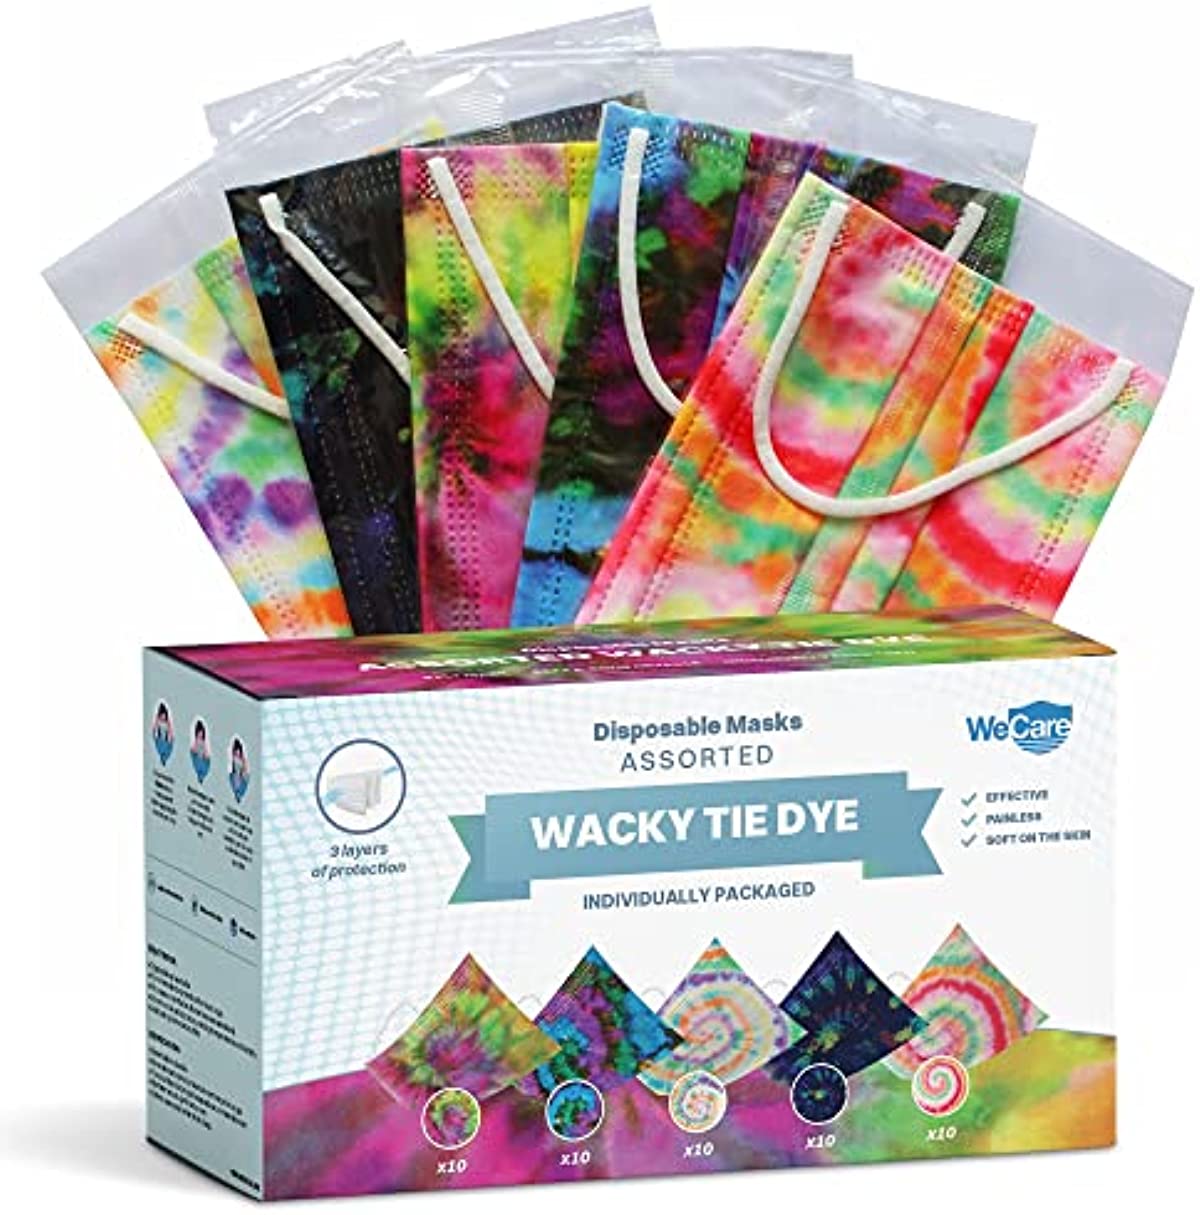 WECARE Disposable Face Mask Individually Wrapped - 50 Pack, Assorted Wacky Tie Dye Masks - 3 Ply